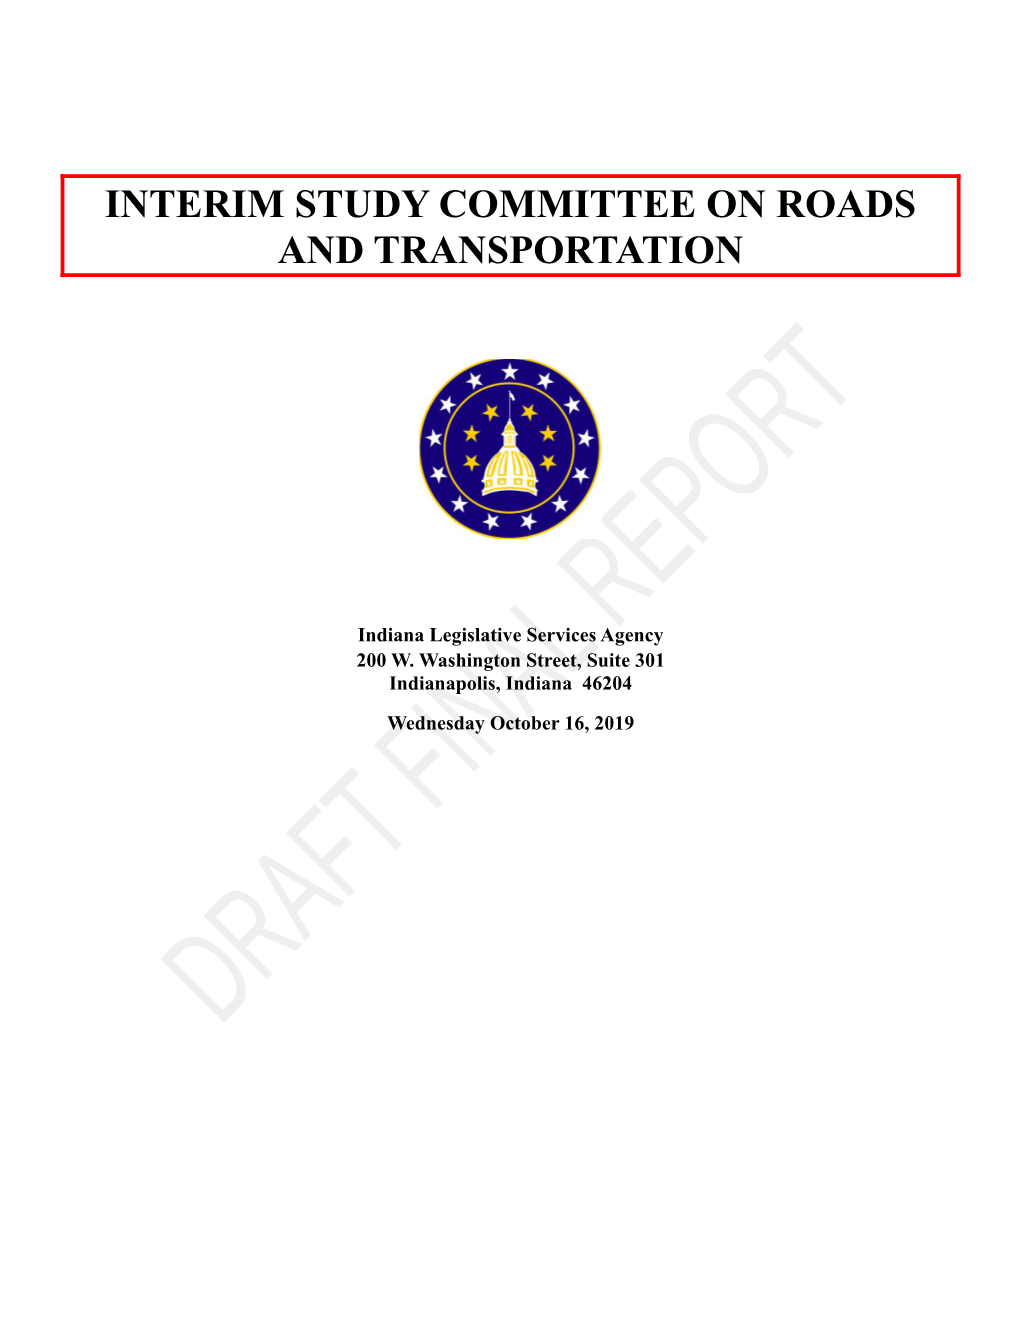 Interim Study Committee on Roads and Transportation